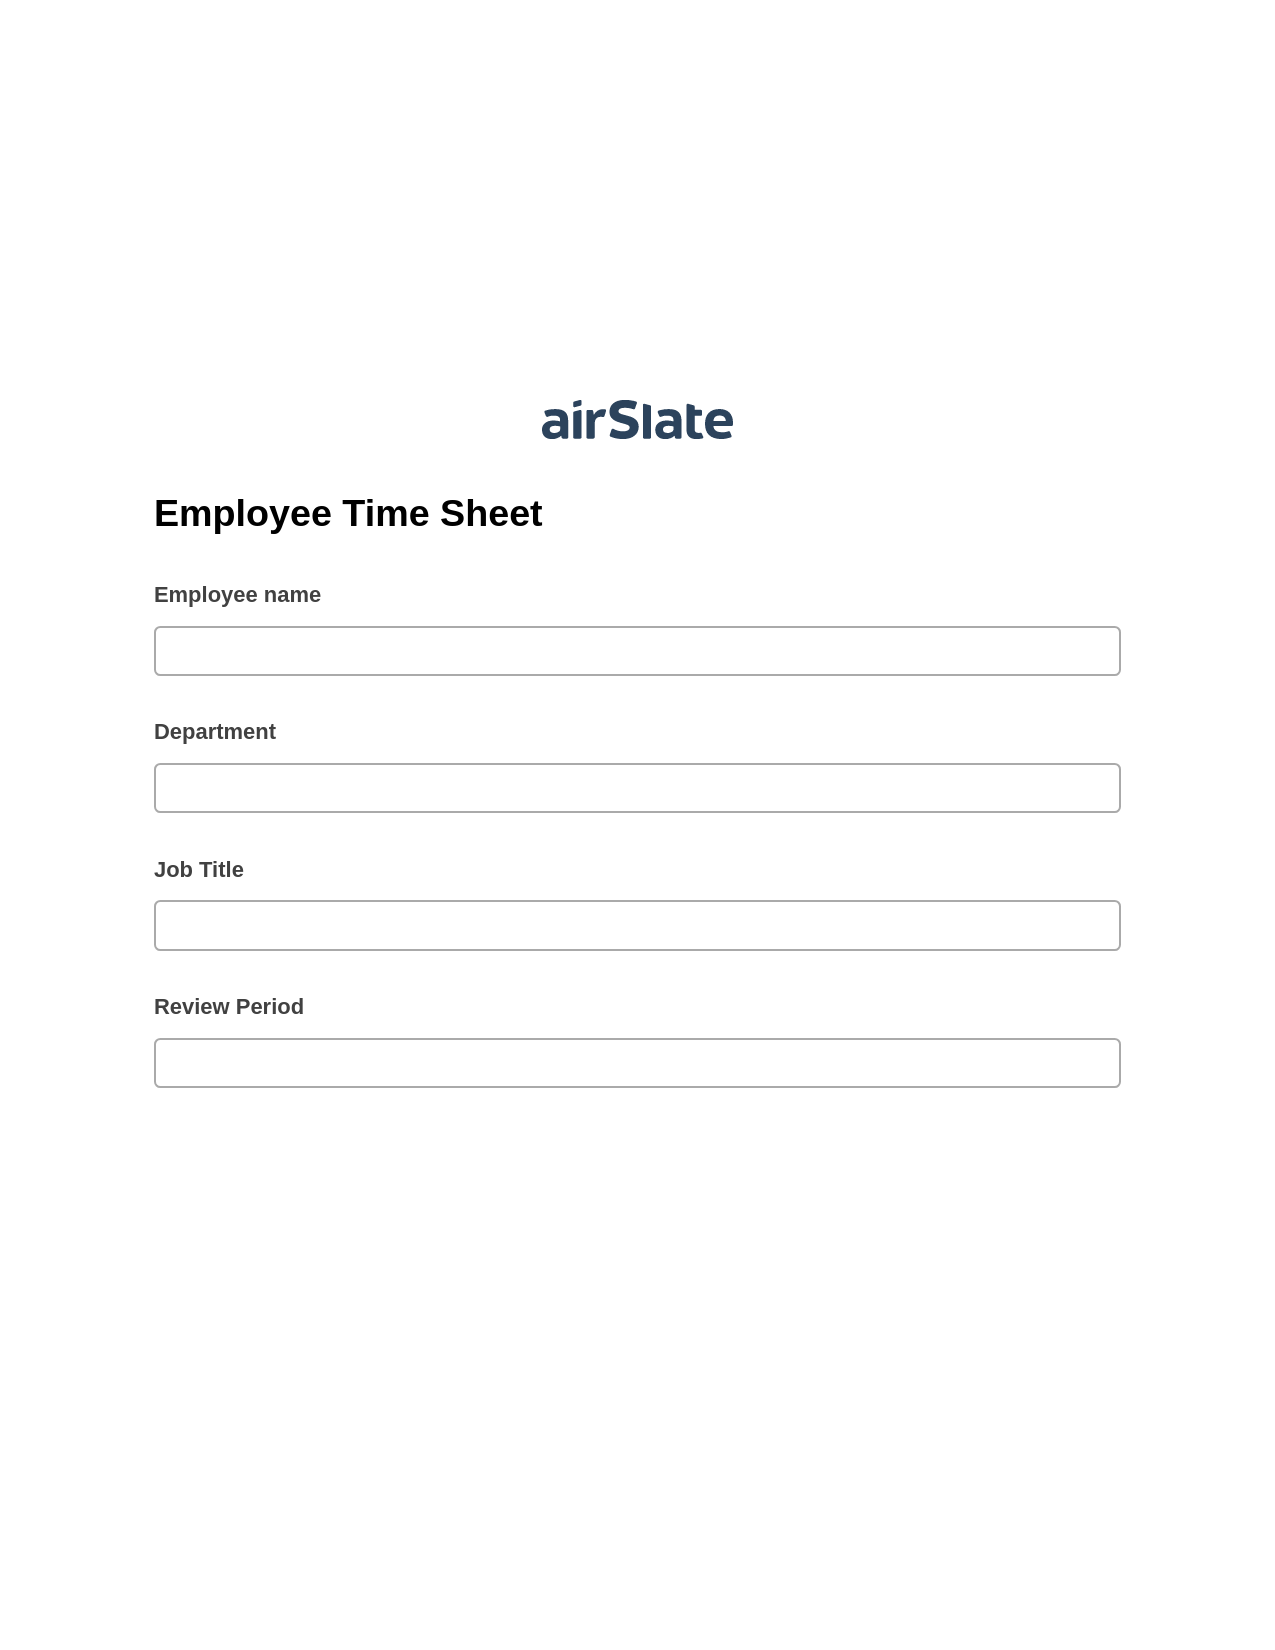 Multirole Employee Time Sheet Prefill from NetSuite records, Lock the Slate Bot, Export to Salesforce Record Bot